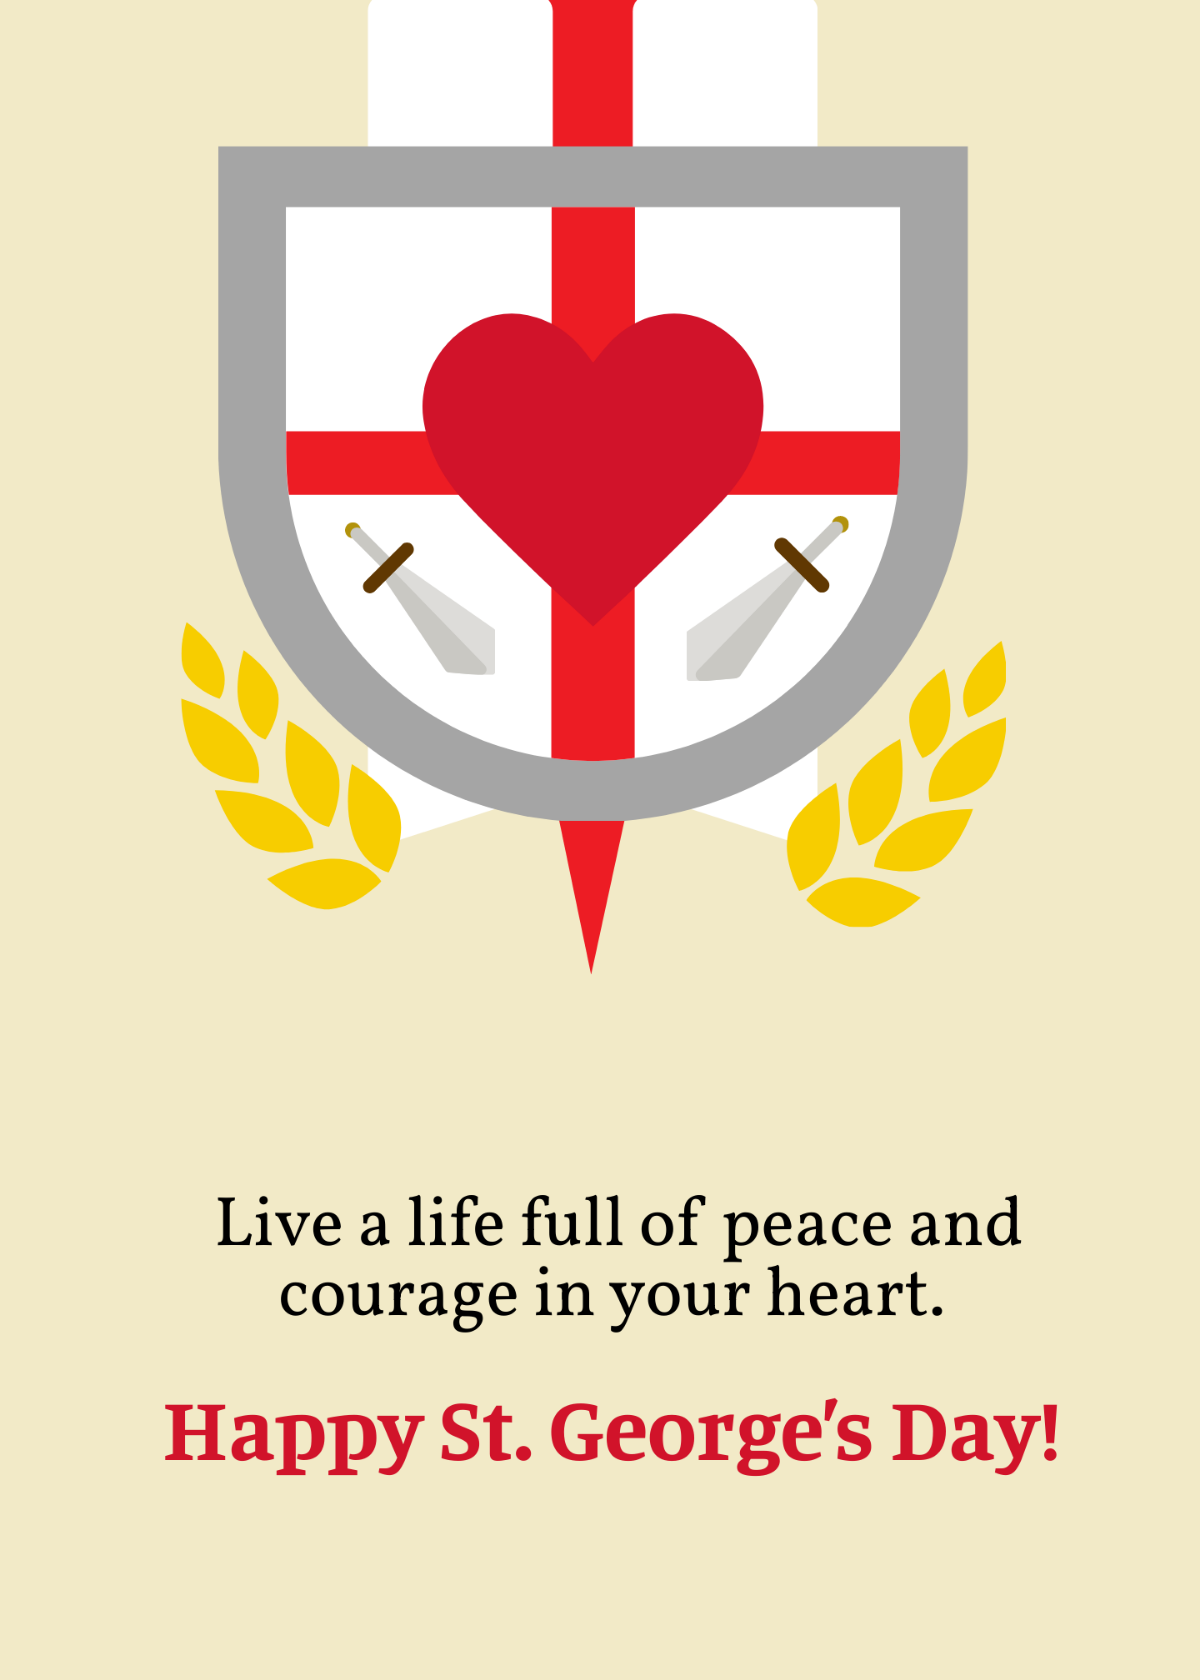 Free St. George's Day Greeting Template